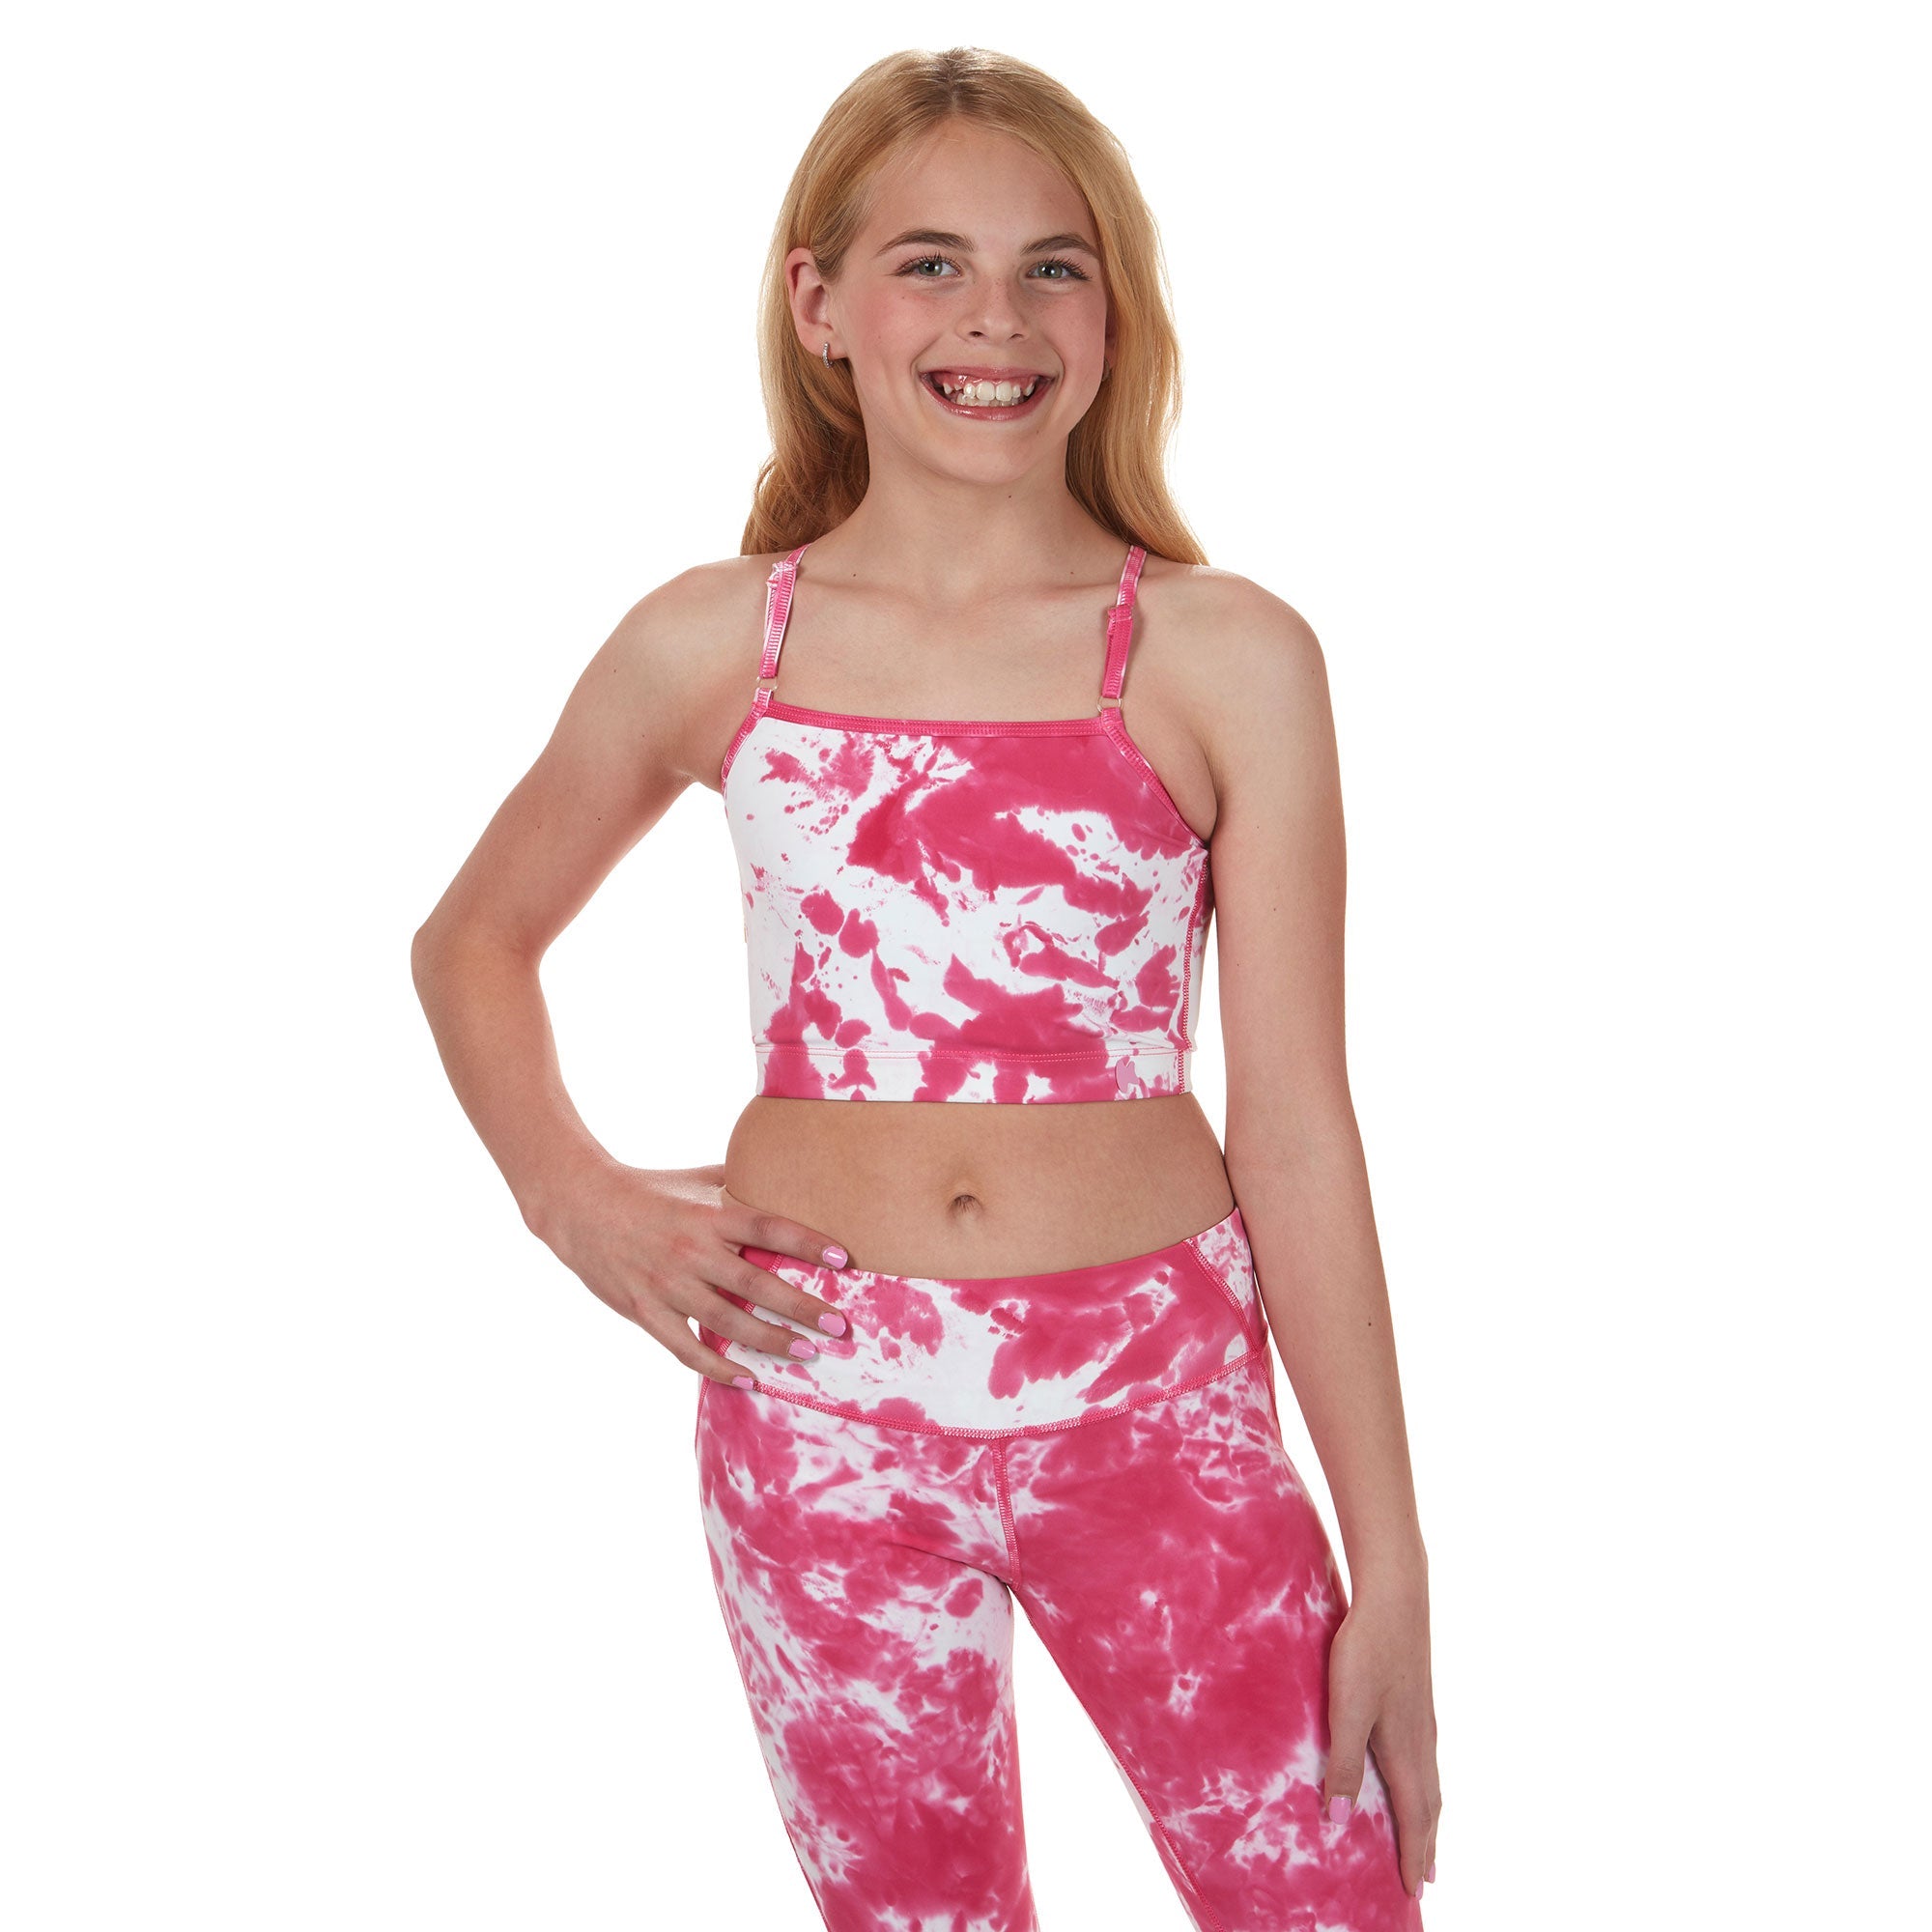 New With Tags - Girls Champion Pink Tie Dye Woven Athletic Shorts Size L  ($18)